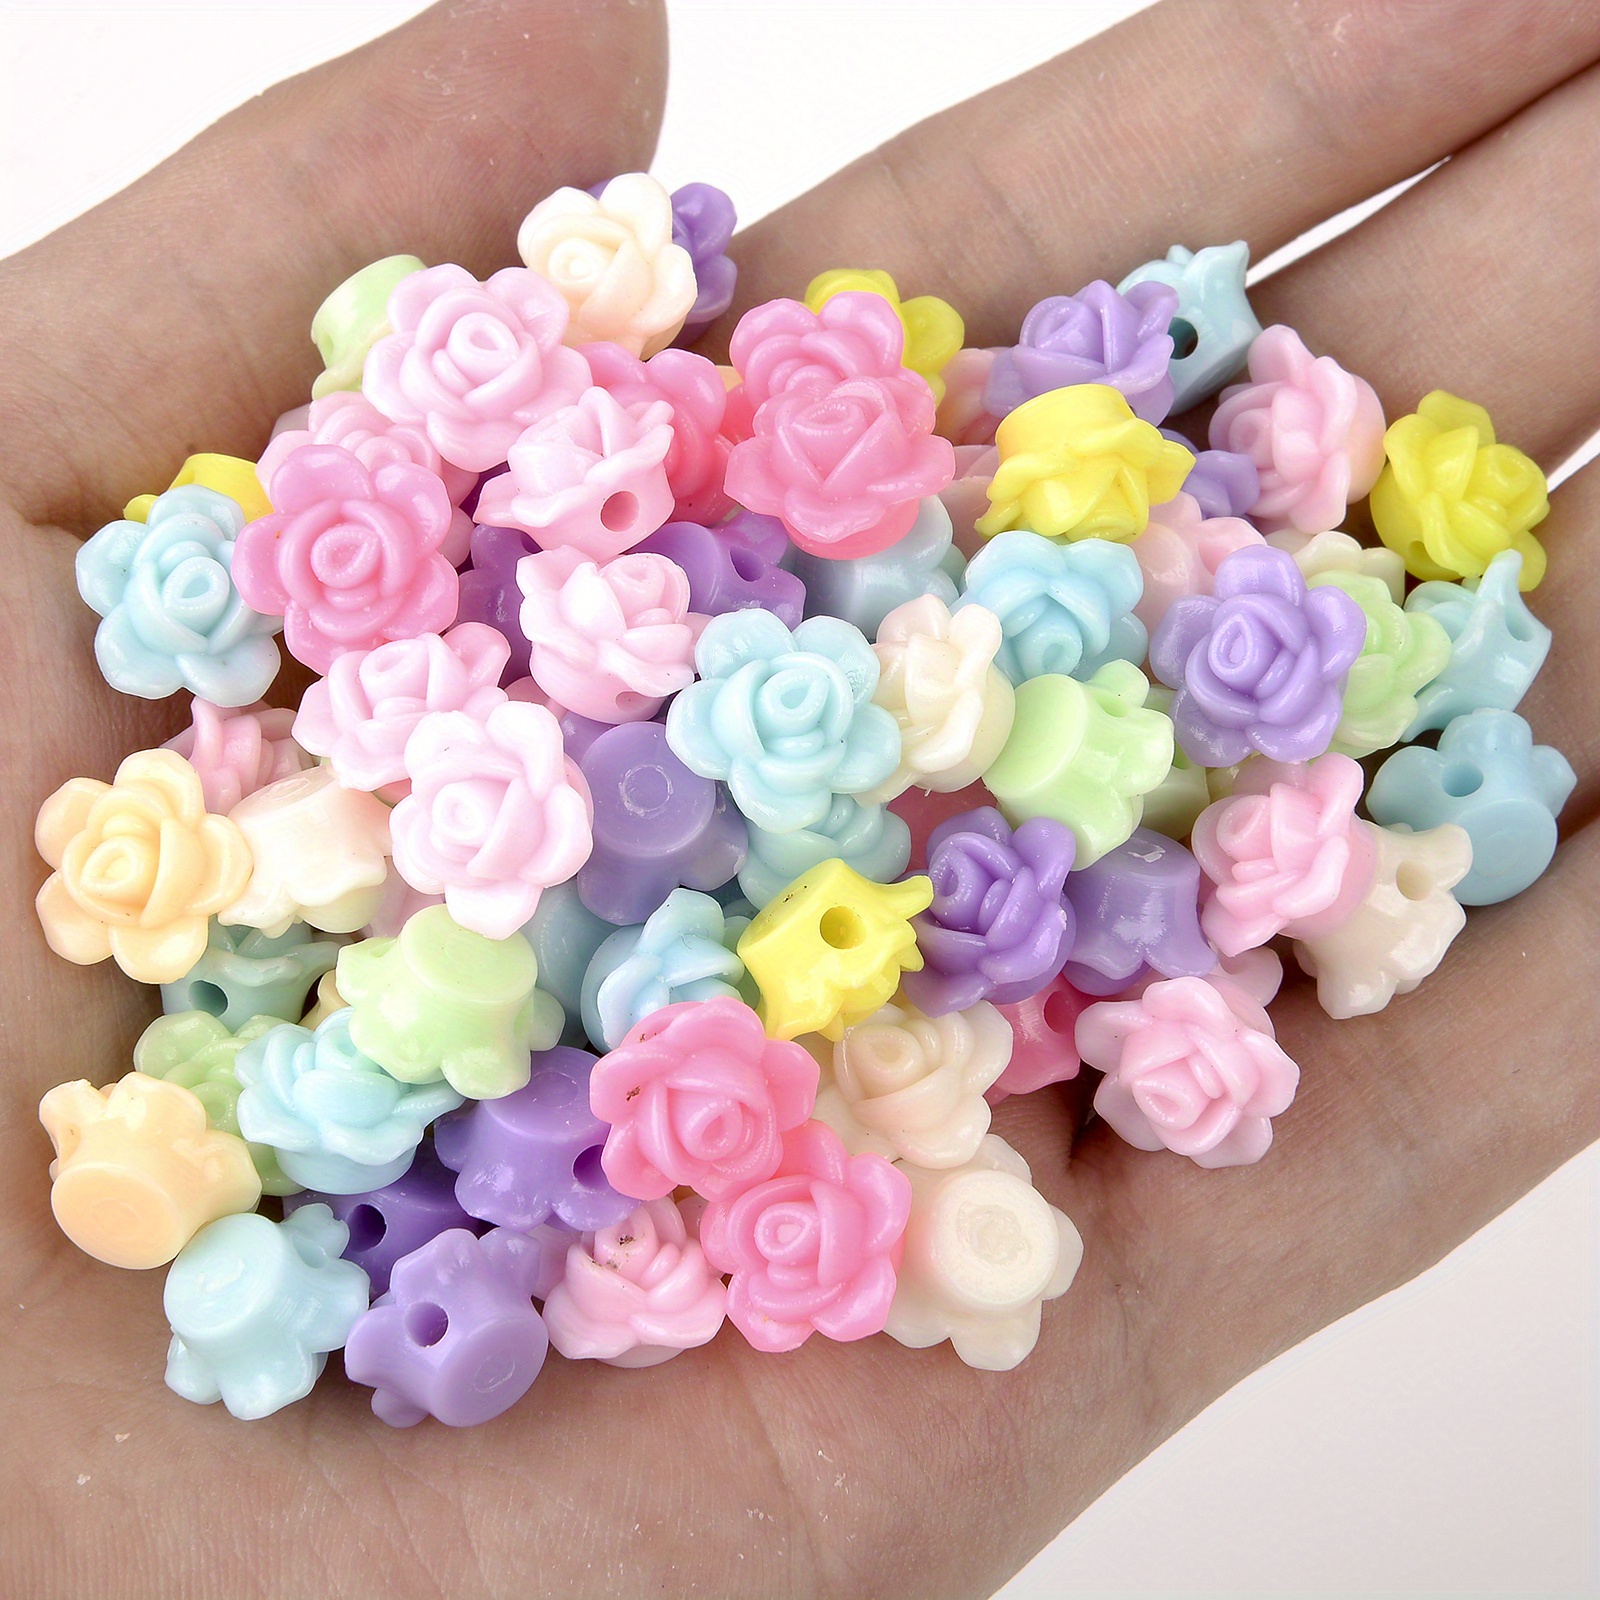 BERMRO 50pcs Flower Beads Acrylic Clear Beads Color Cute Beads for DIY  Phone Chain Key Chain Bracelet Necklace Car Hanging Mixed Color Beads  (clear